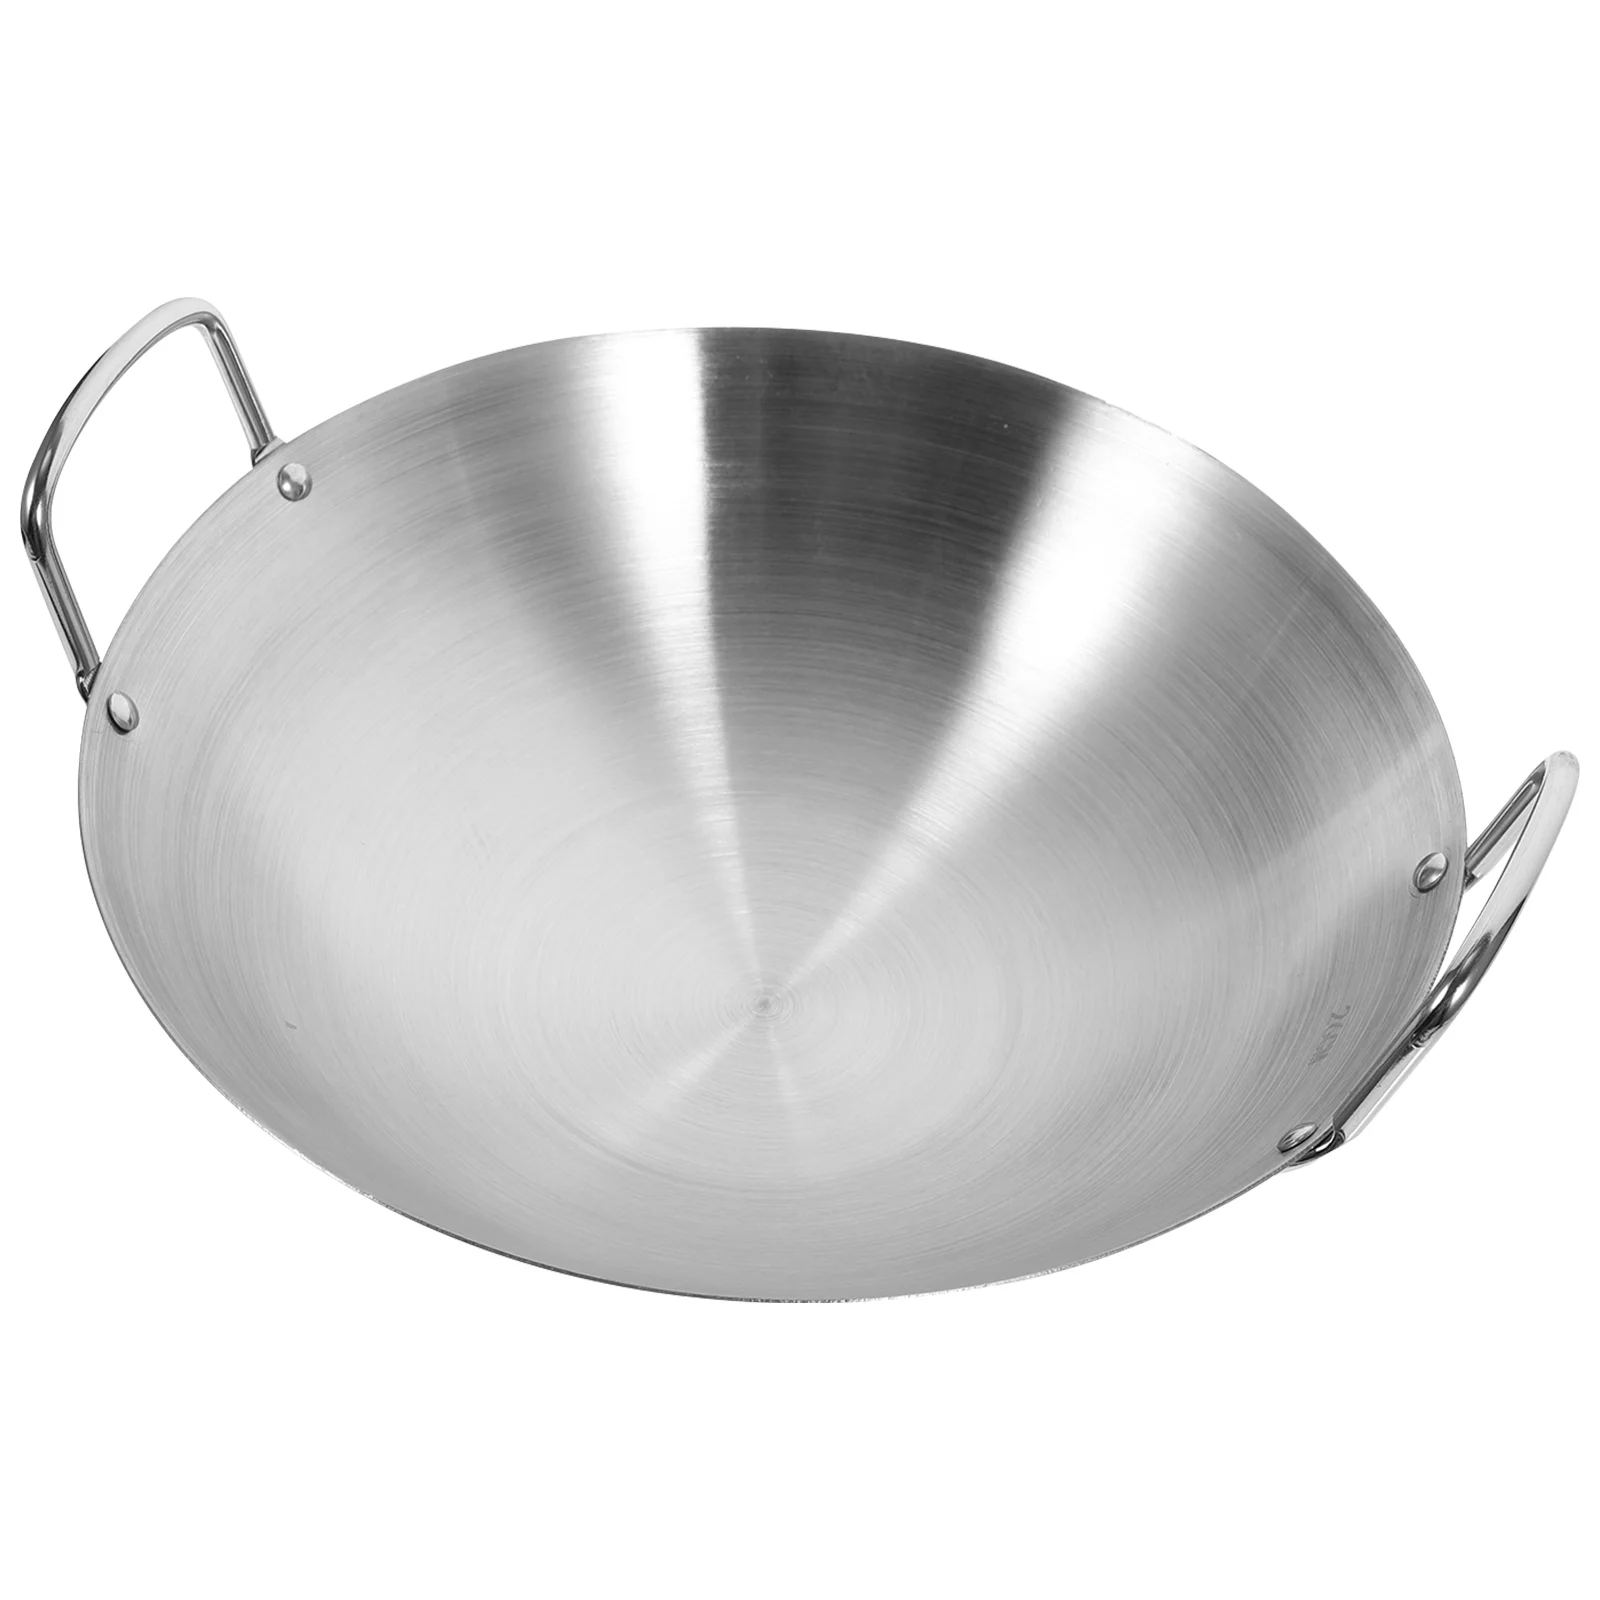 

Stainless Steel Wok Induction Household Non-stick Pan Cauldron Double Handle Cooking Pot Kitchen Frying Work